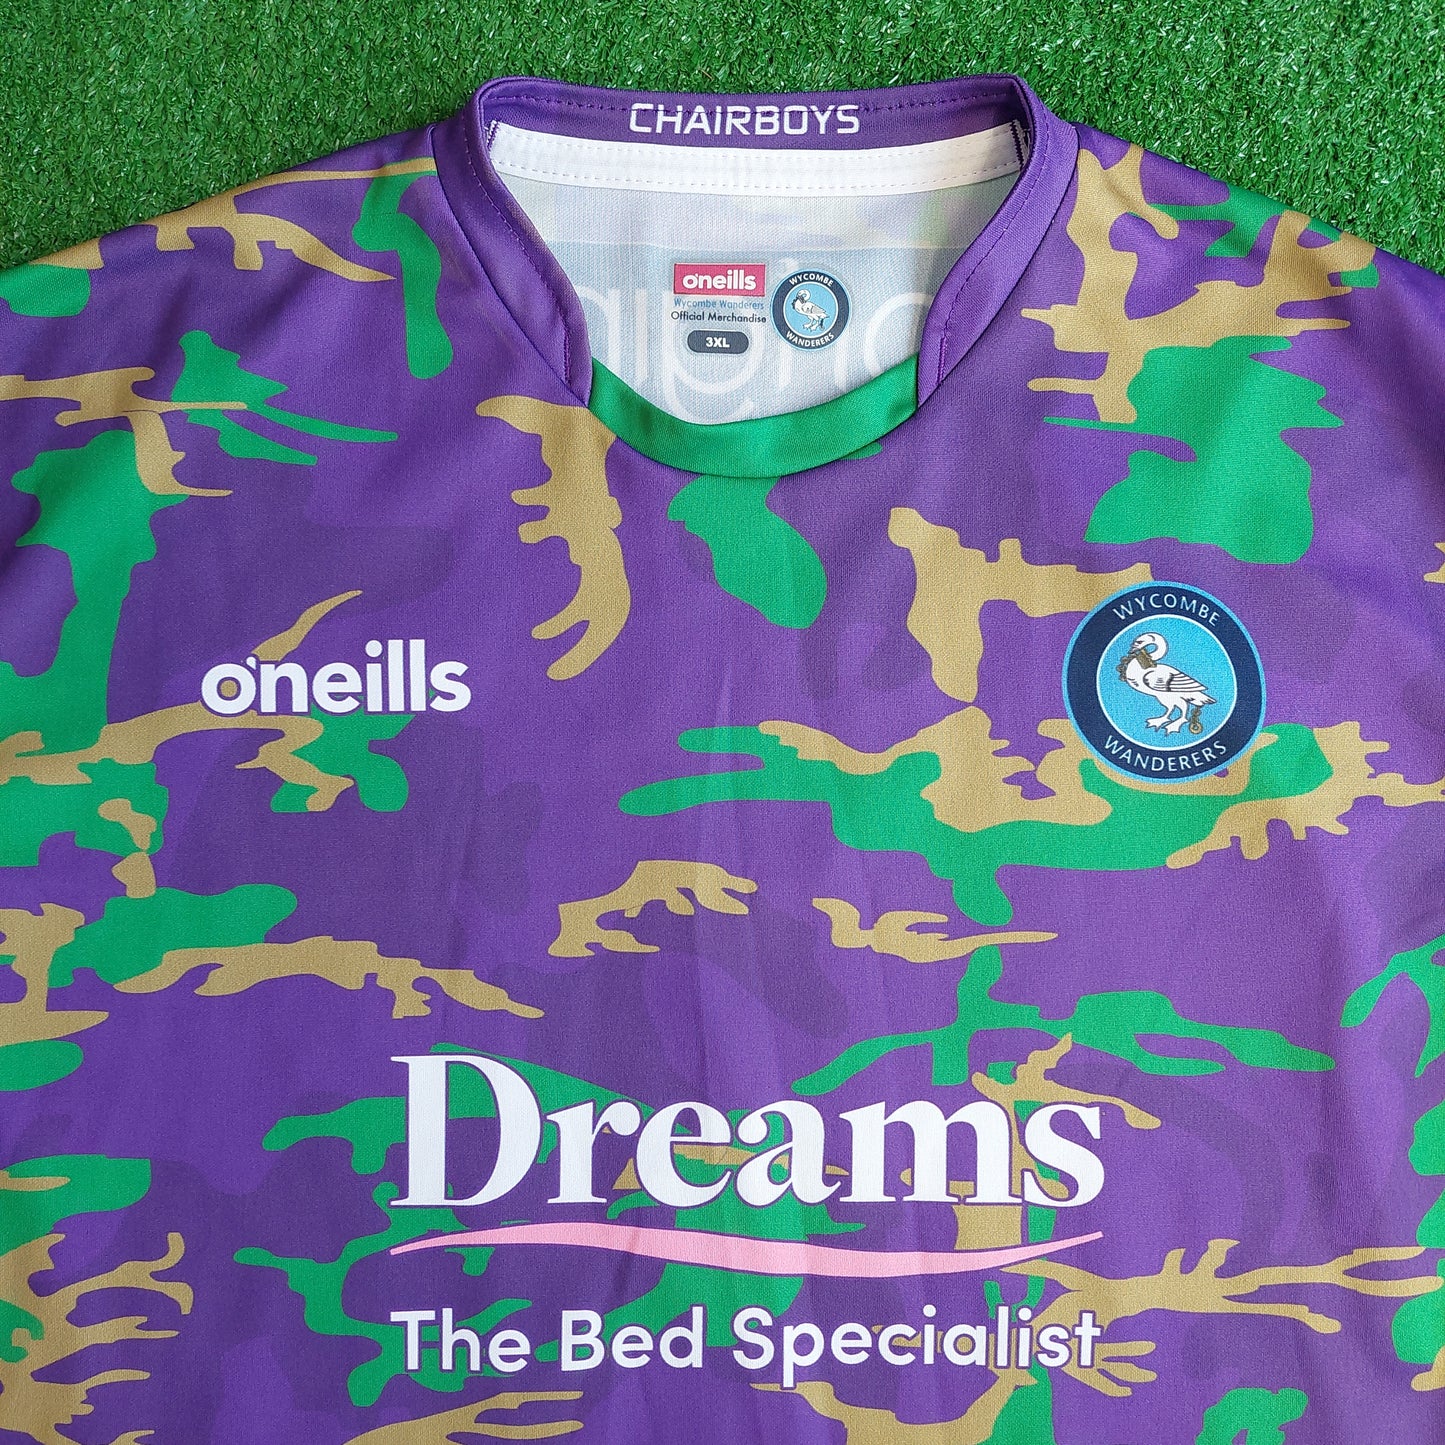 Wycombe Wanderers 2021/22 GK Shirt (Excellent) - Size 3XL